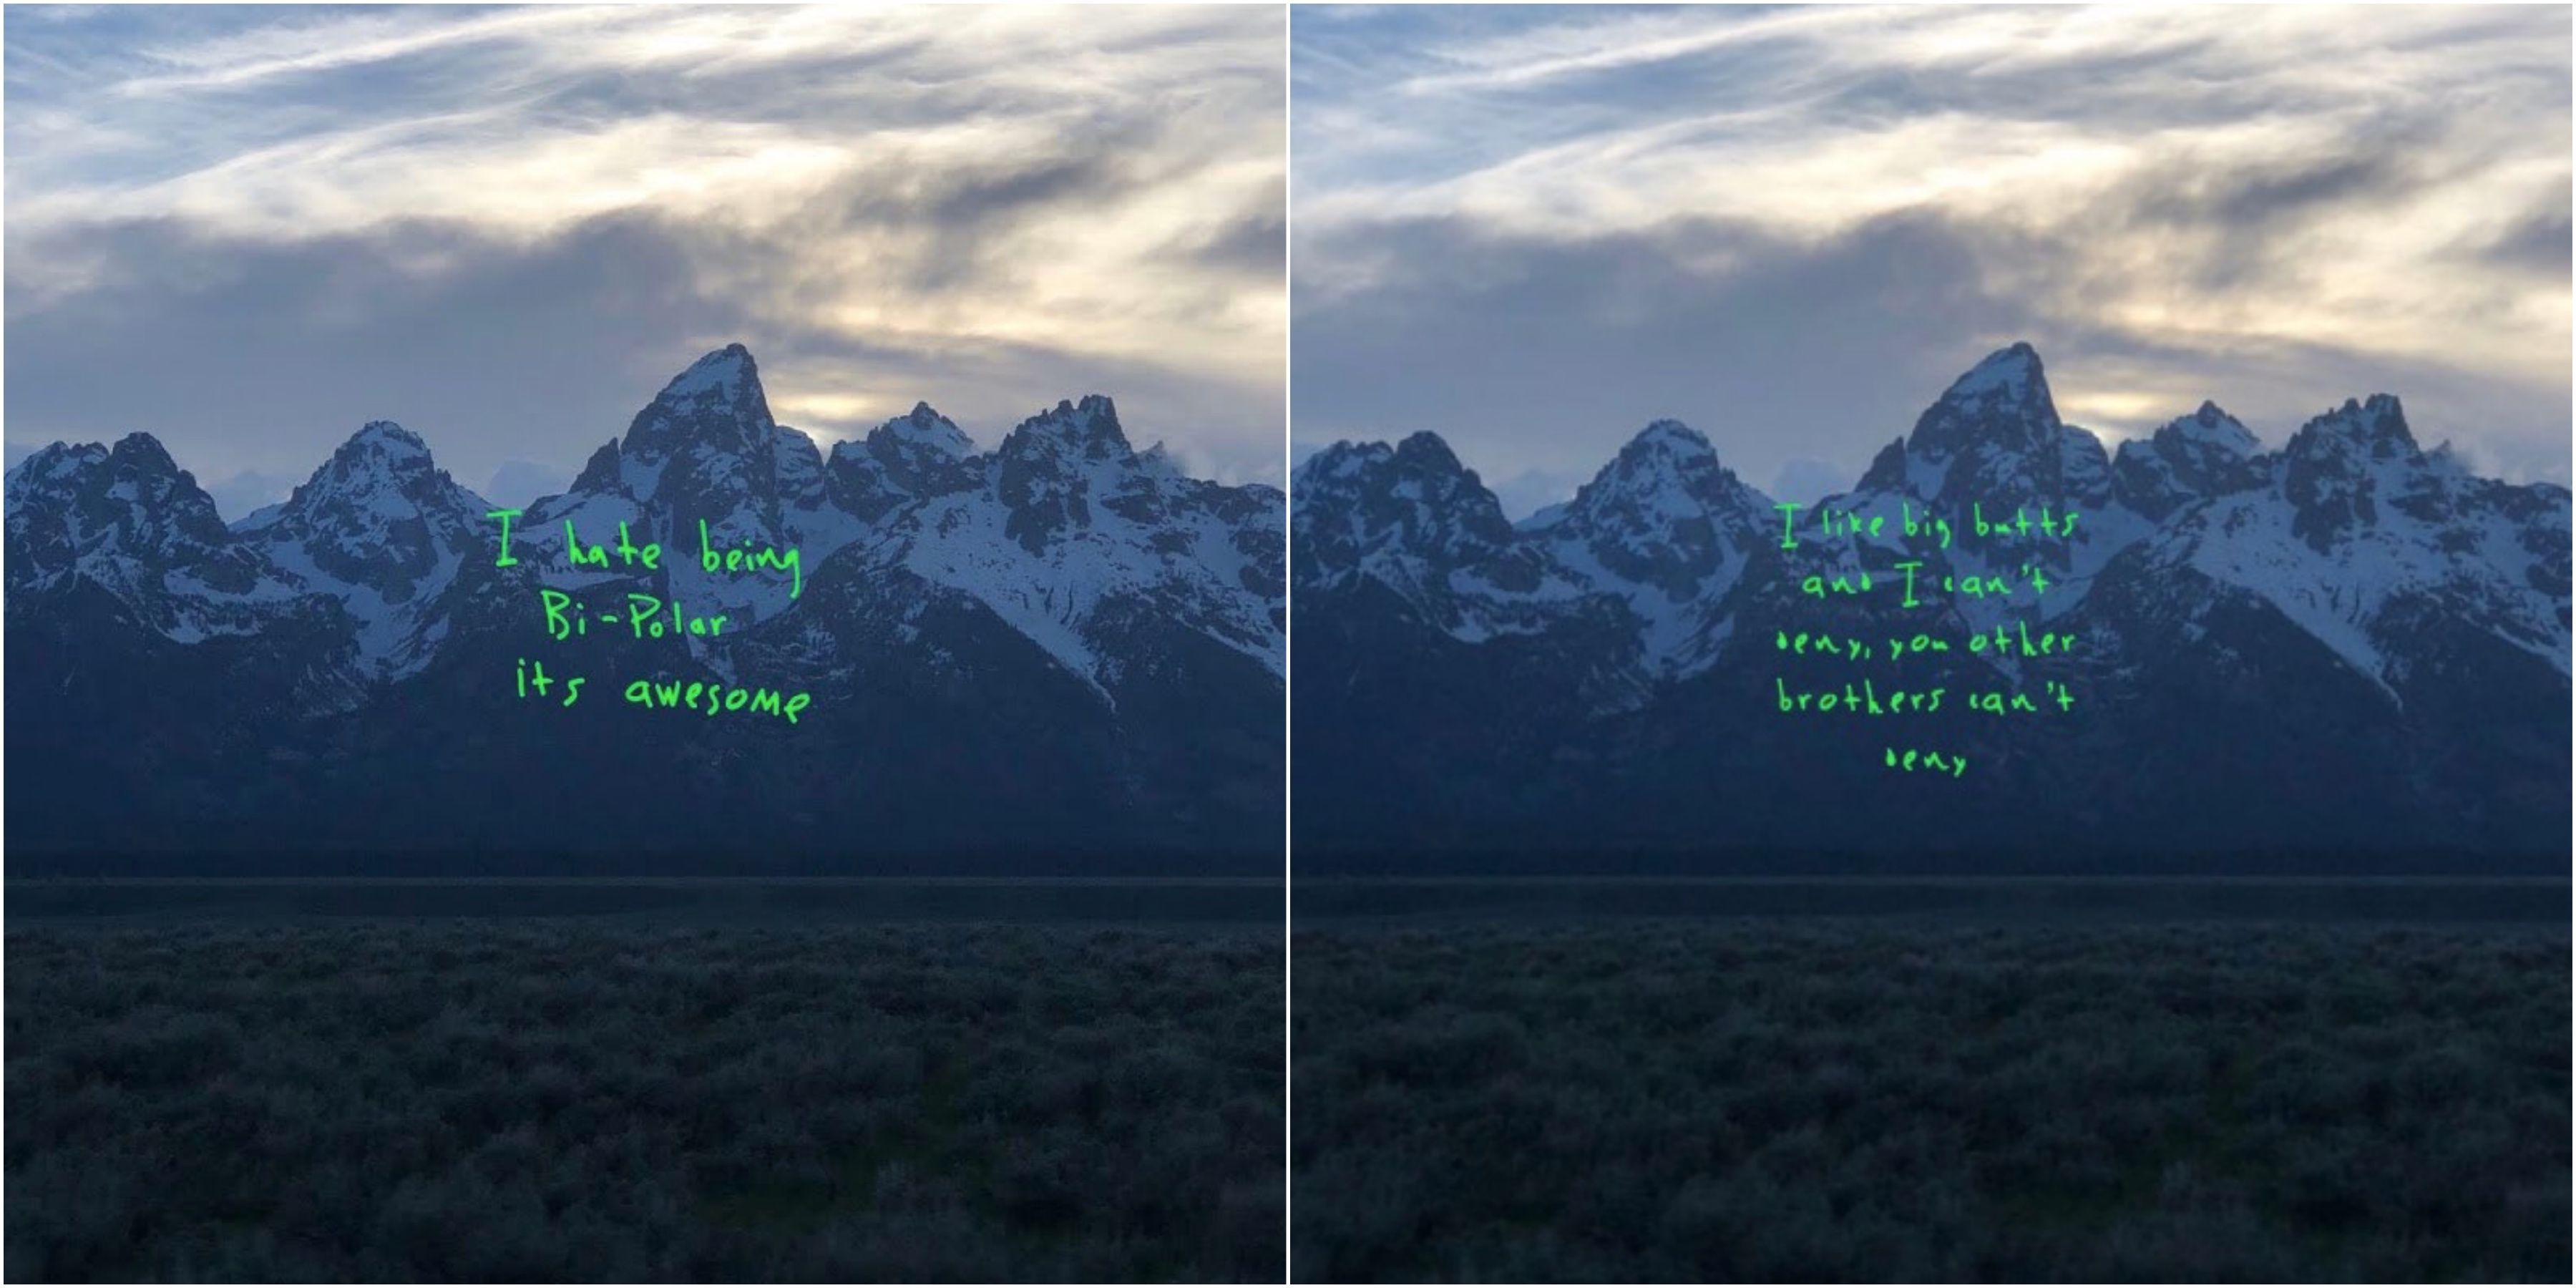 Kanye West S Album Cover Has Immediately Become A Meme And We Approve